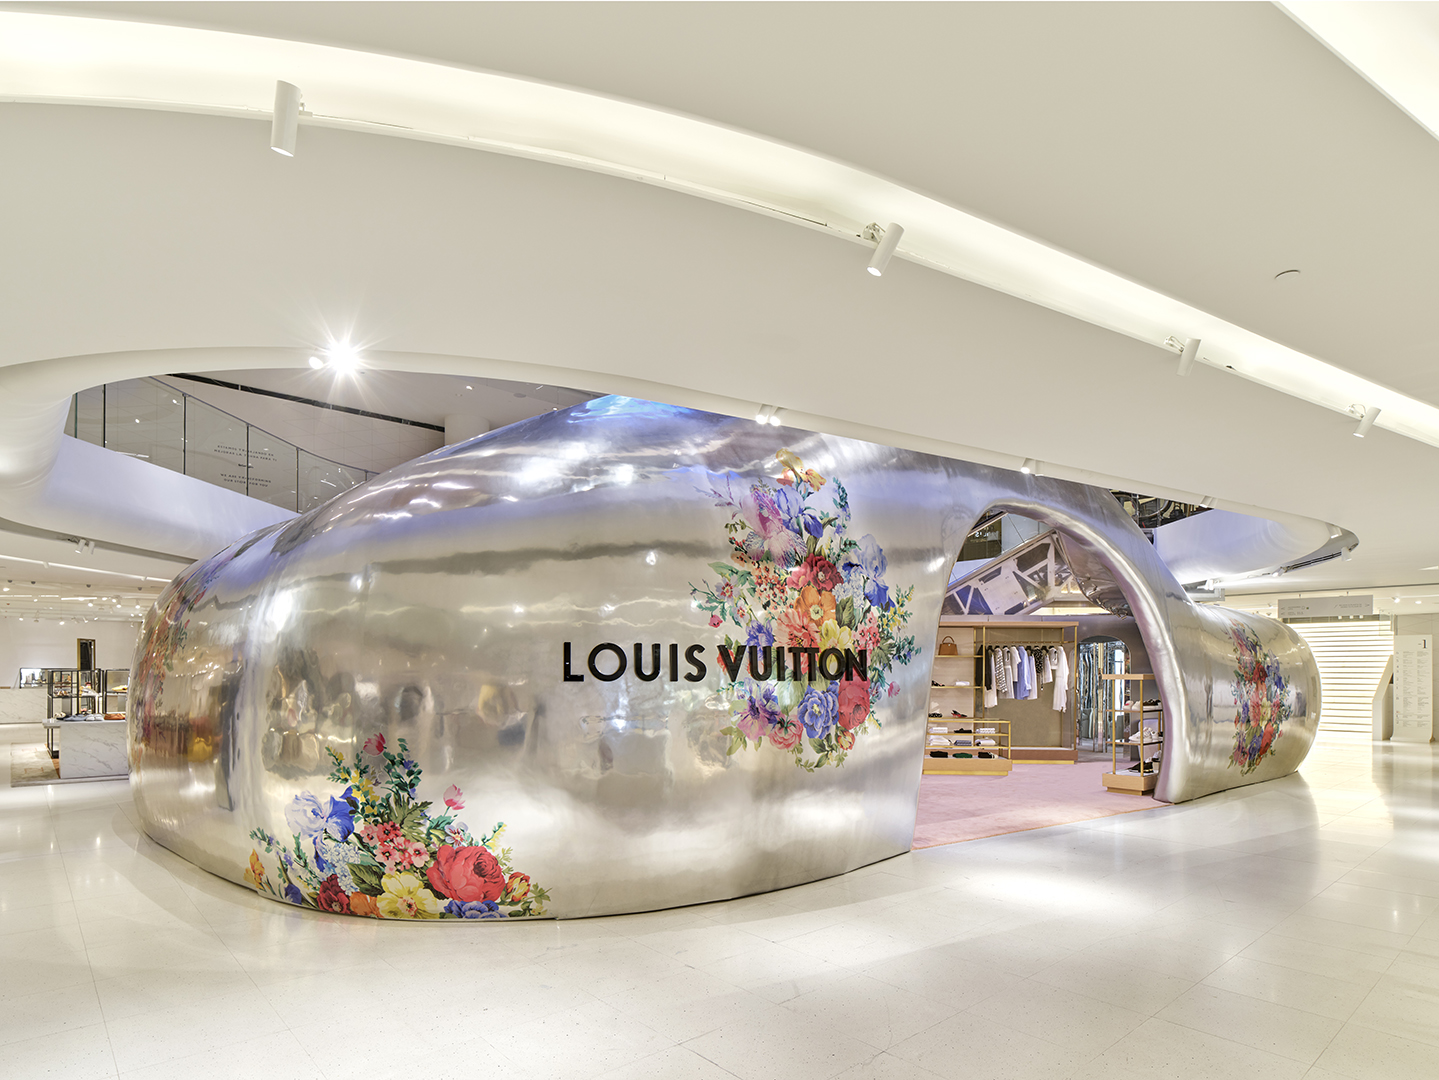 Louis vuitton headquarters in spain—creation of a new reception